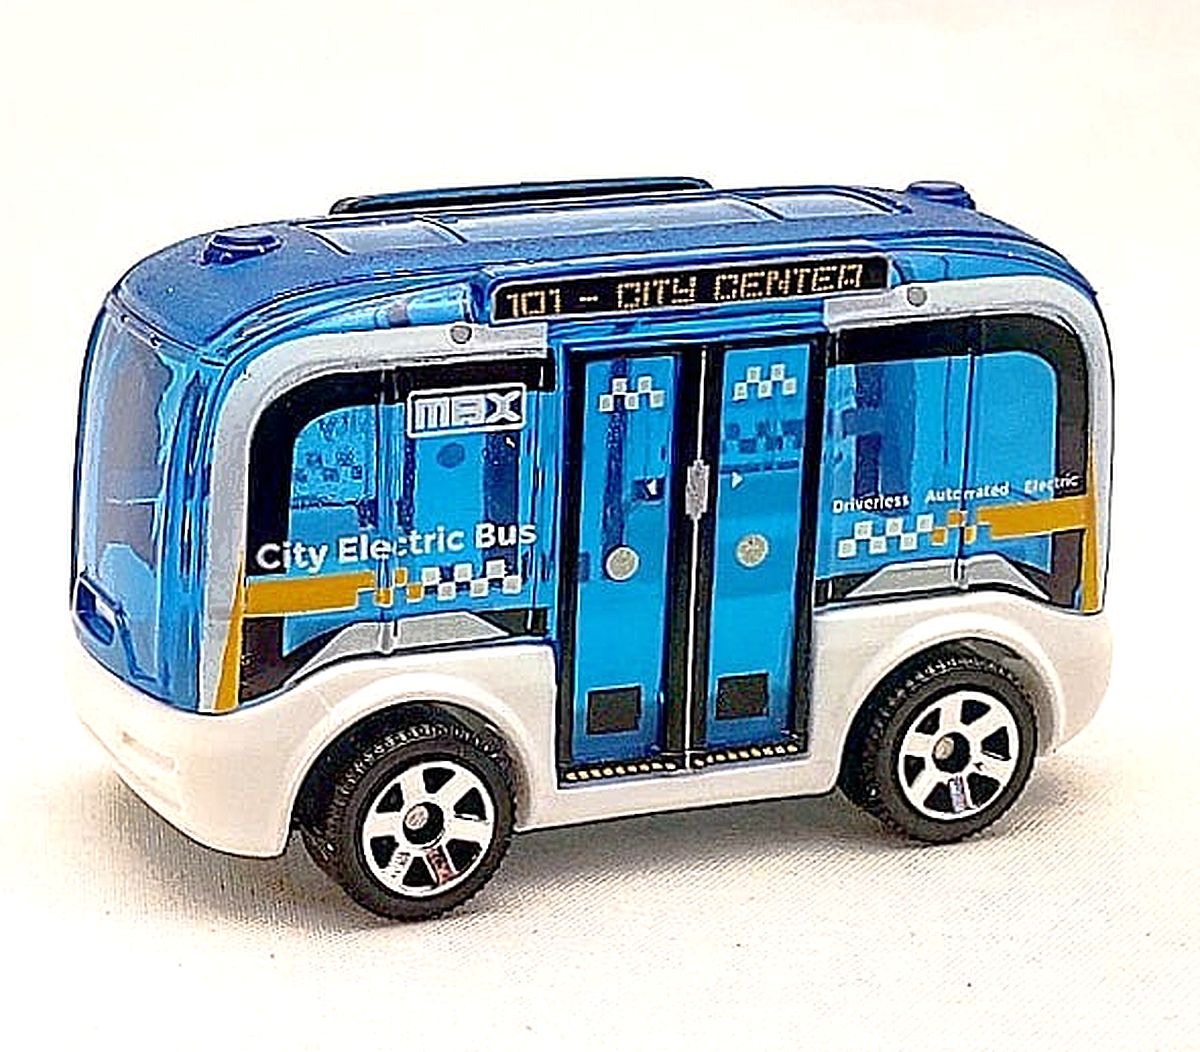 Category:Electric Cars | Matchbox Cars 